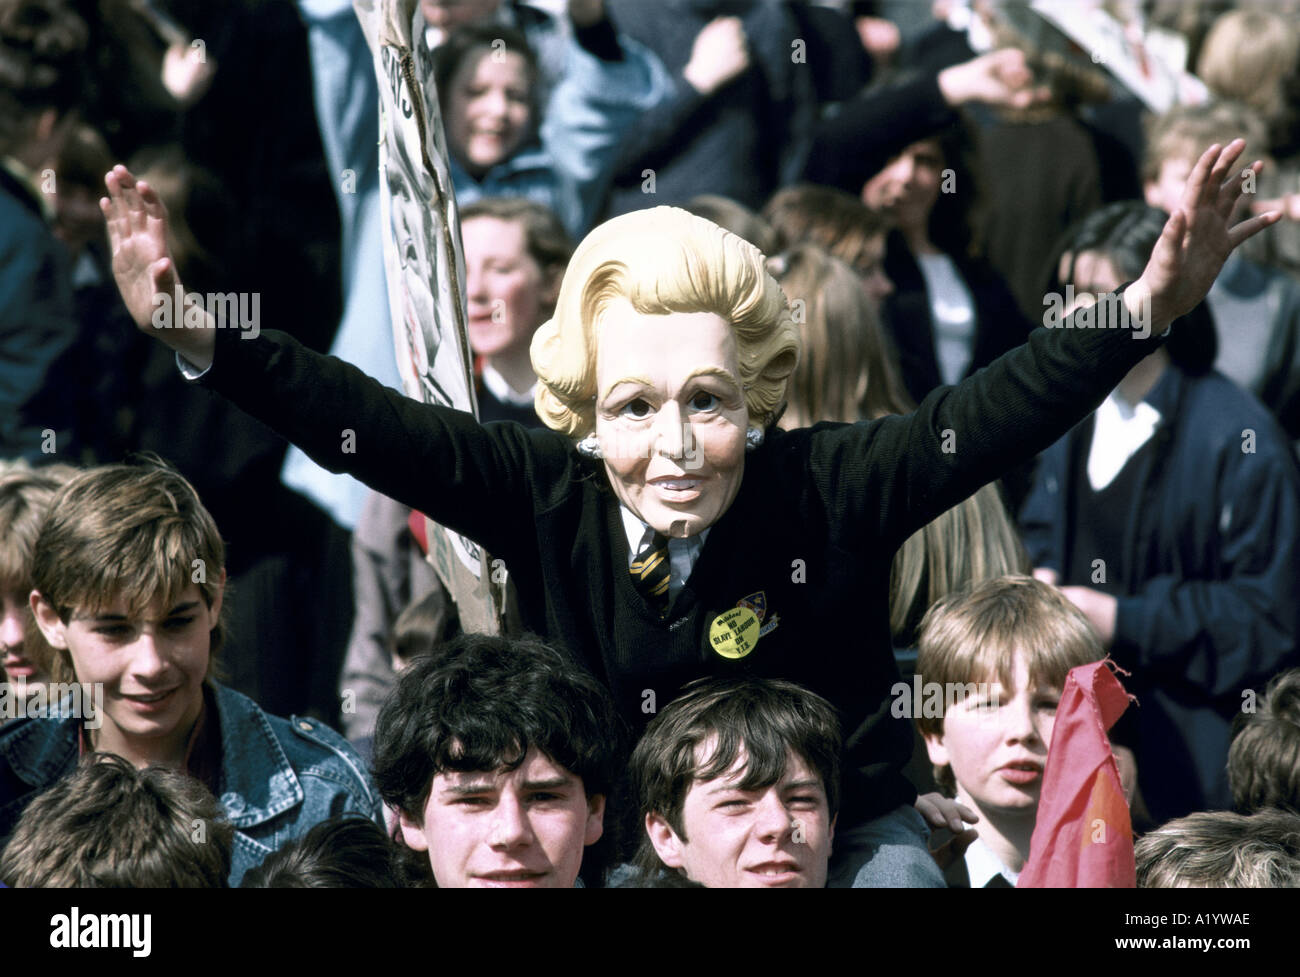 CROWD OF YOUTHS ONE WEARING THATCHER MASK Stock Photo